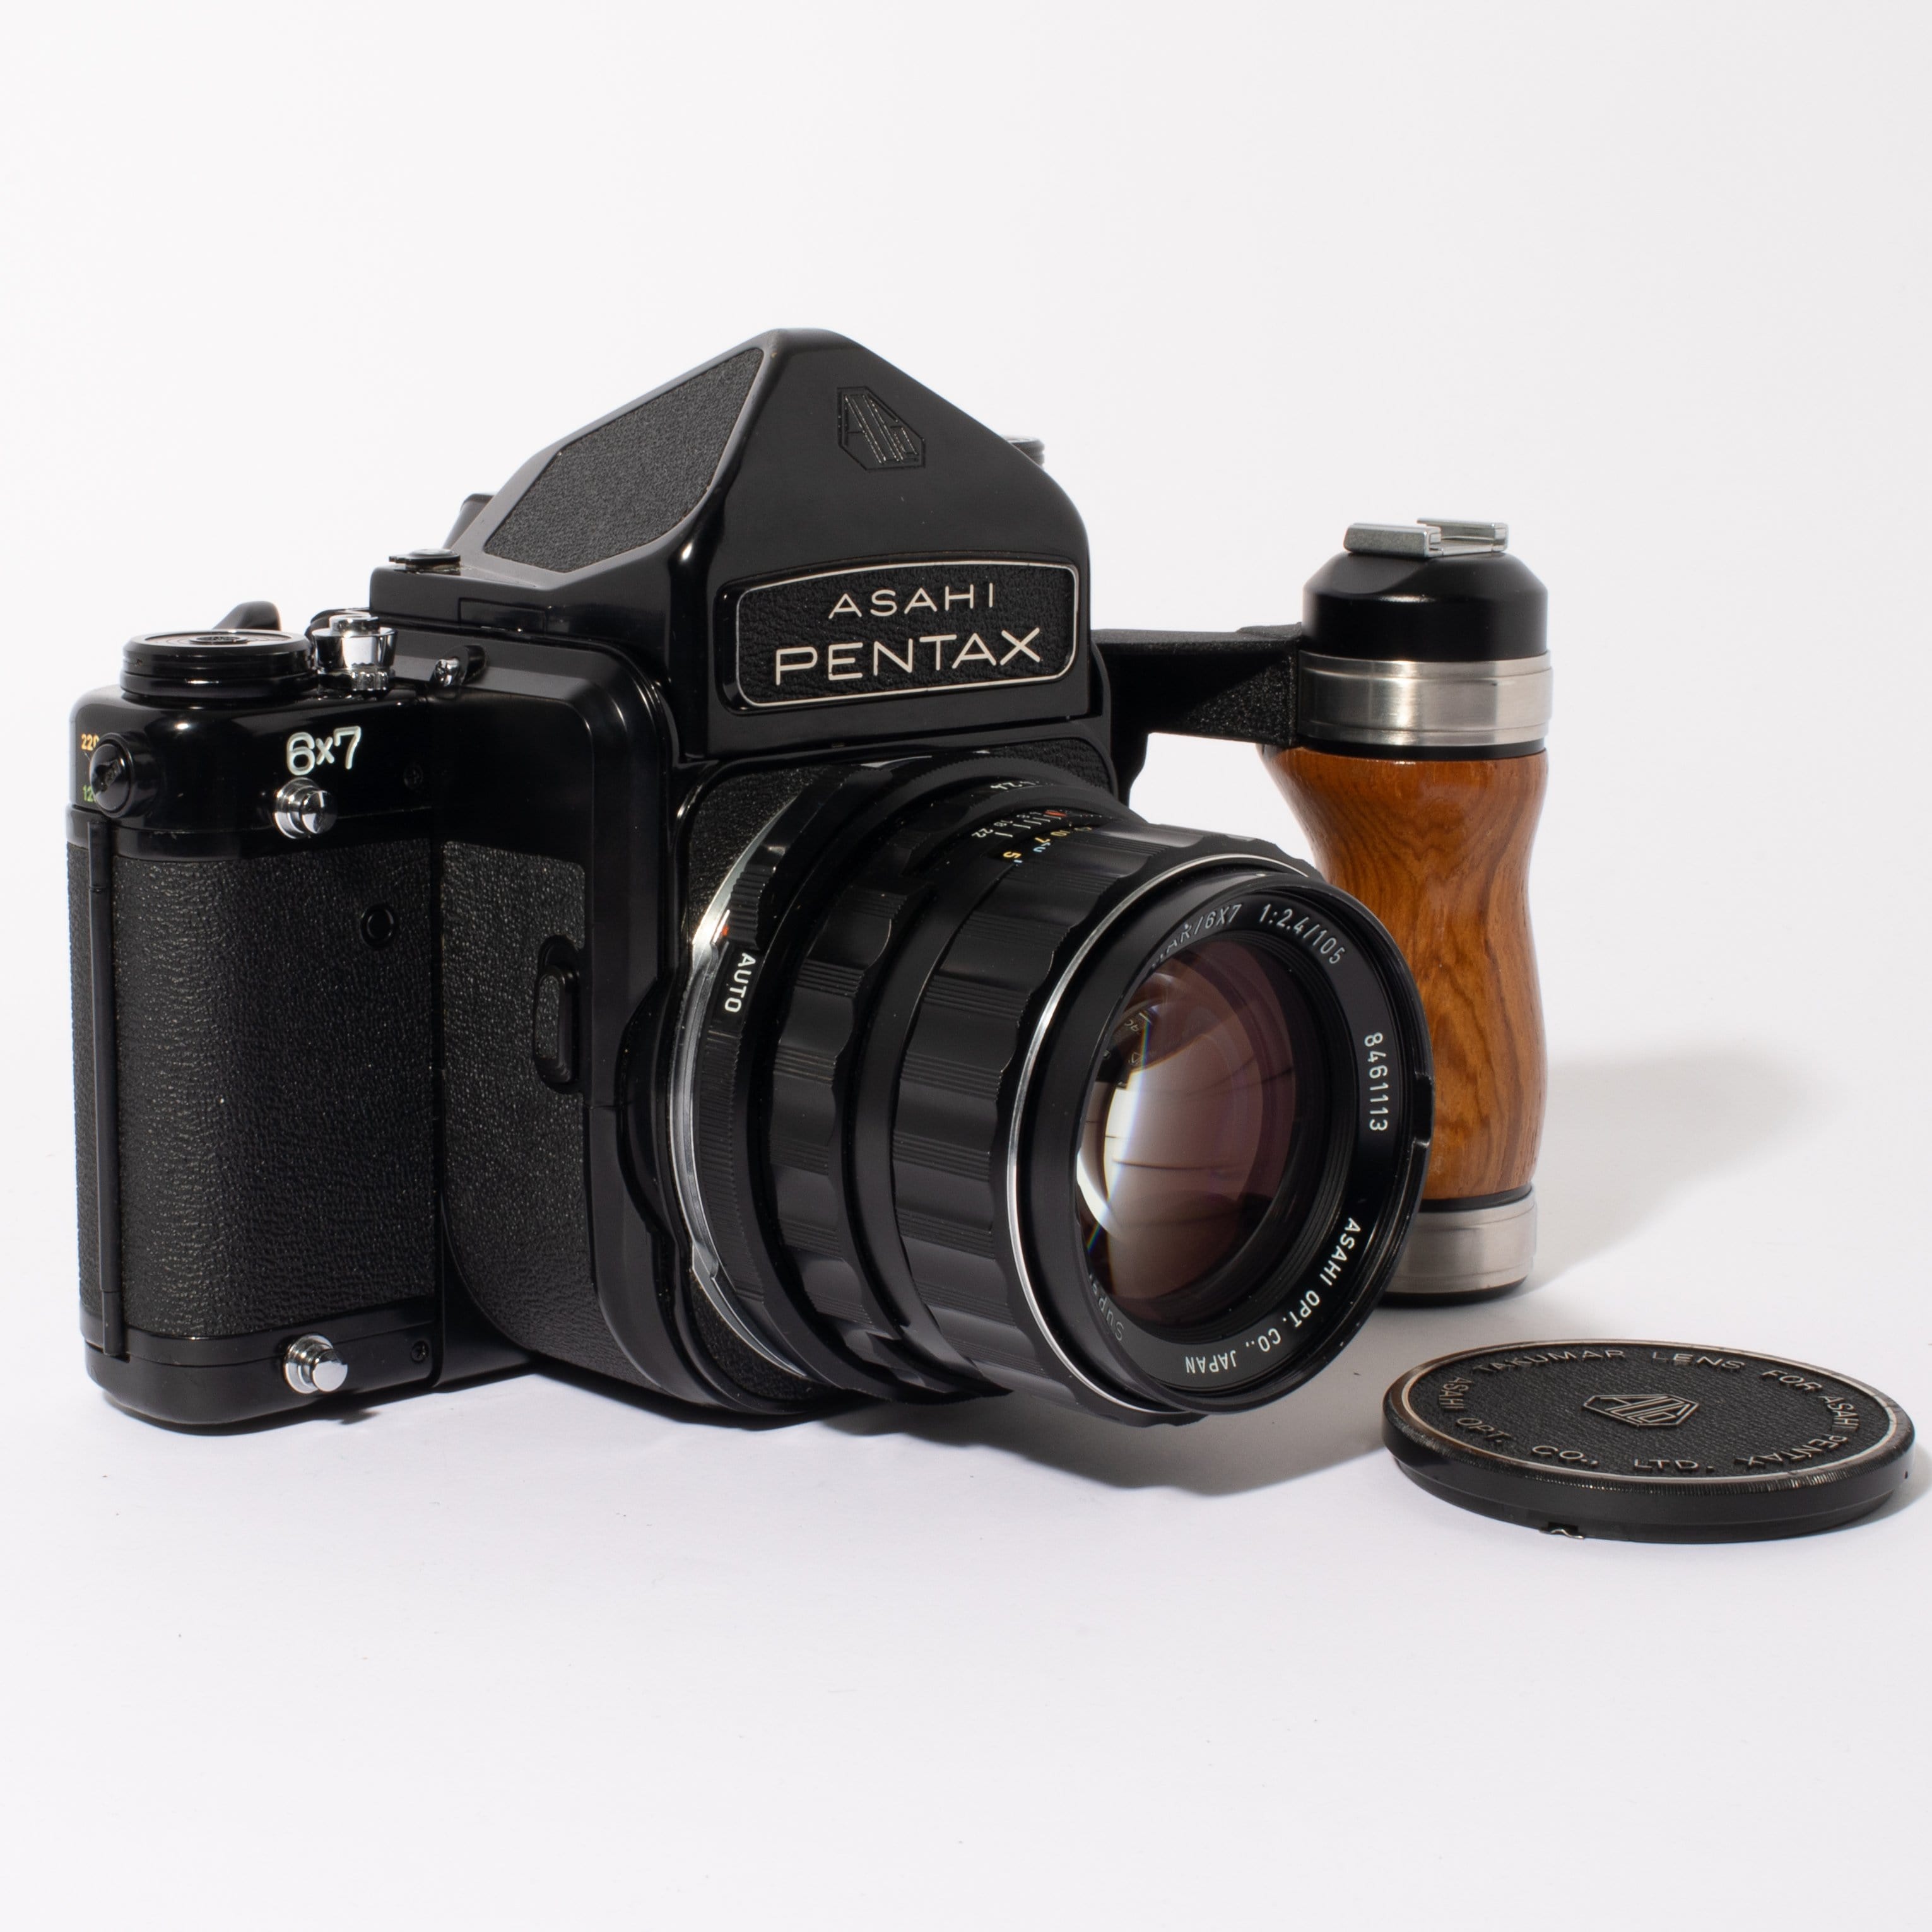 Asahi Pentax 6x7 MLU with 105mm f/2.4 Lens and TTL Prism Finder